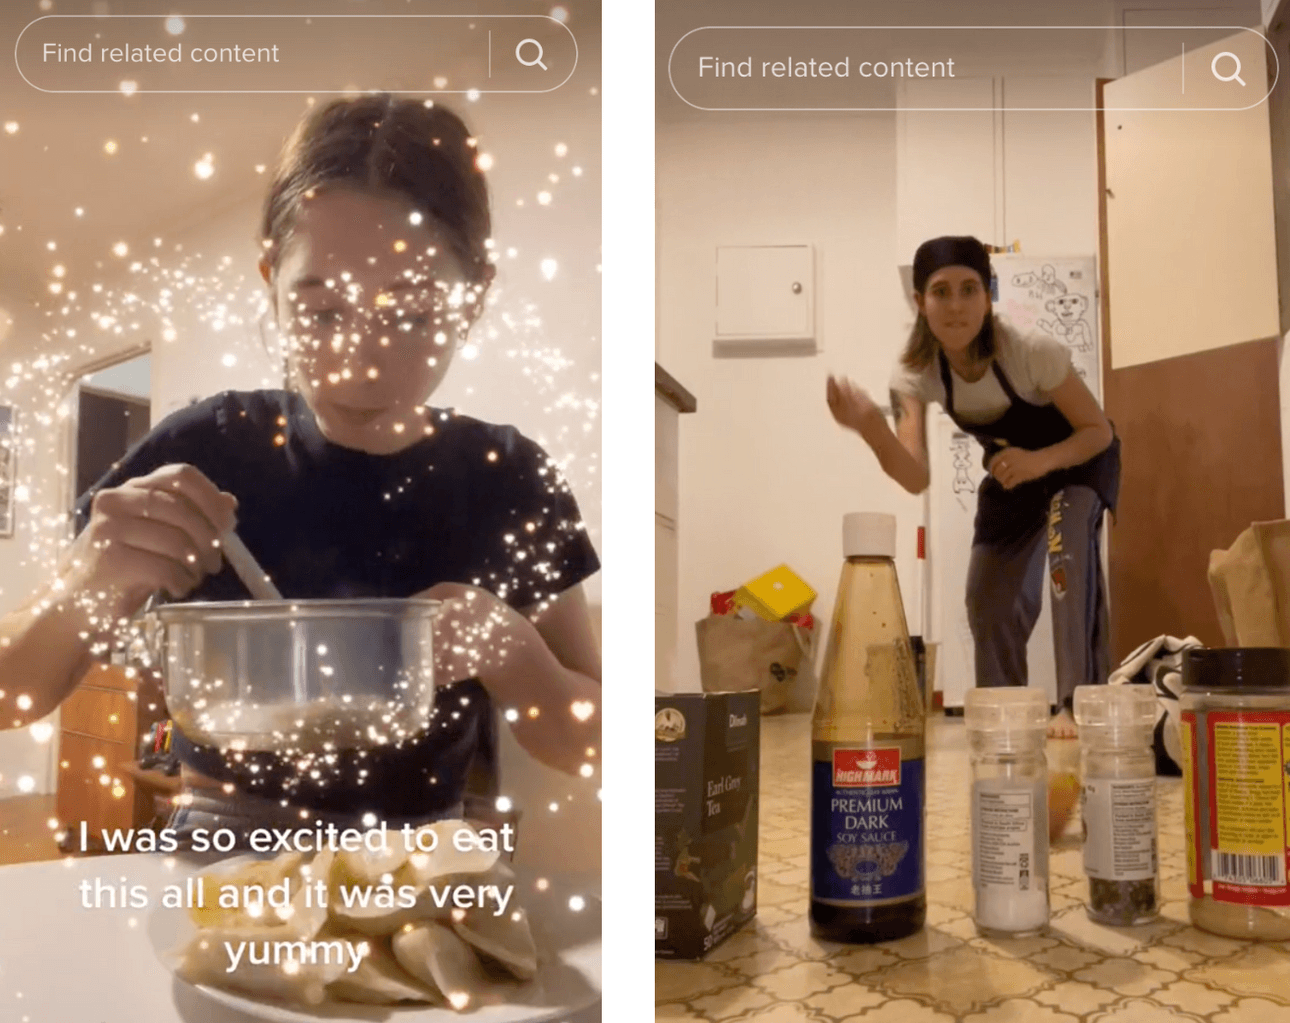 Screenshots from TikTok show Fudgeywudgeychef eating dumplings with a sparkly effect added to the video. The other screenshot shows Fudgeywudgeychef standing behind a lineup of Earl grey tea bags, soy sauce, salt and pepper and nutritional yeast on the kitchen floor as she lobs an onion at them. 